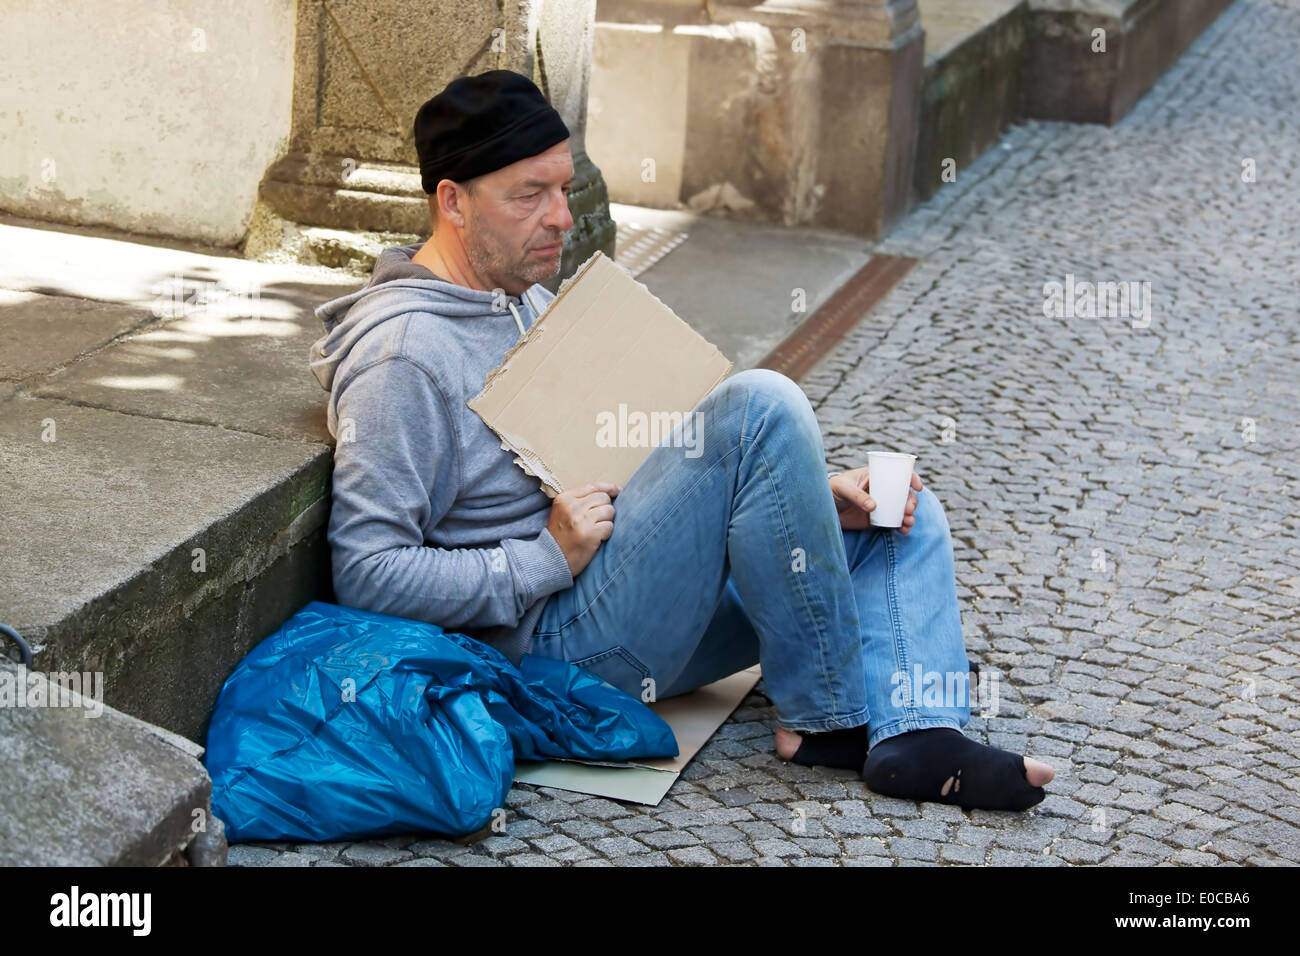 A jobless beggar is homeless and is hungry, Ein arbeitsloser Bettler ist Obdachlos und hat Hunger Stock Photo